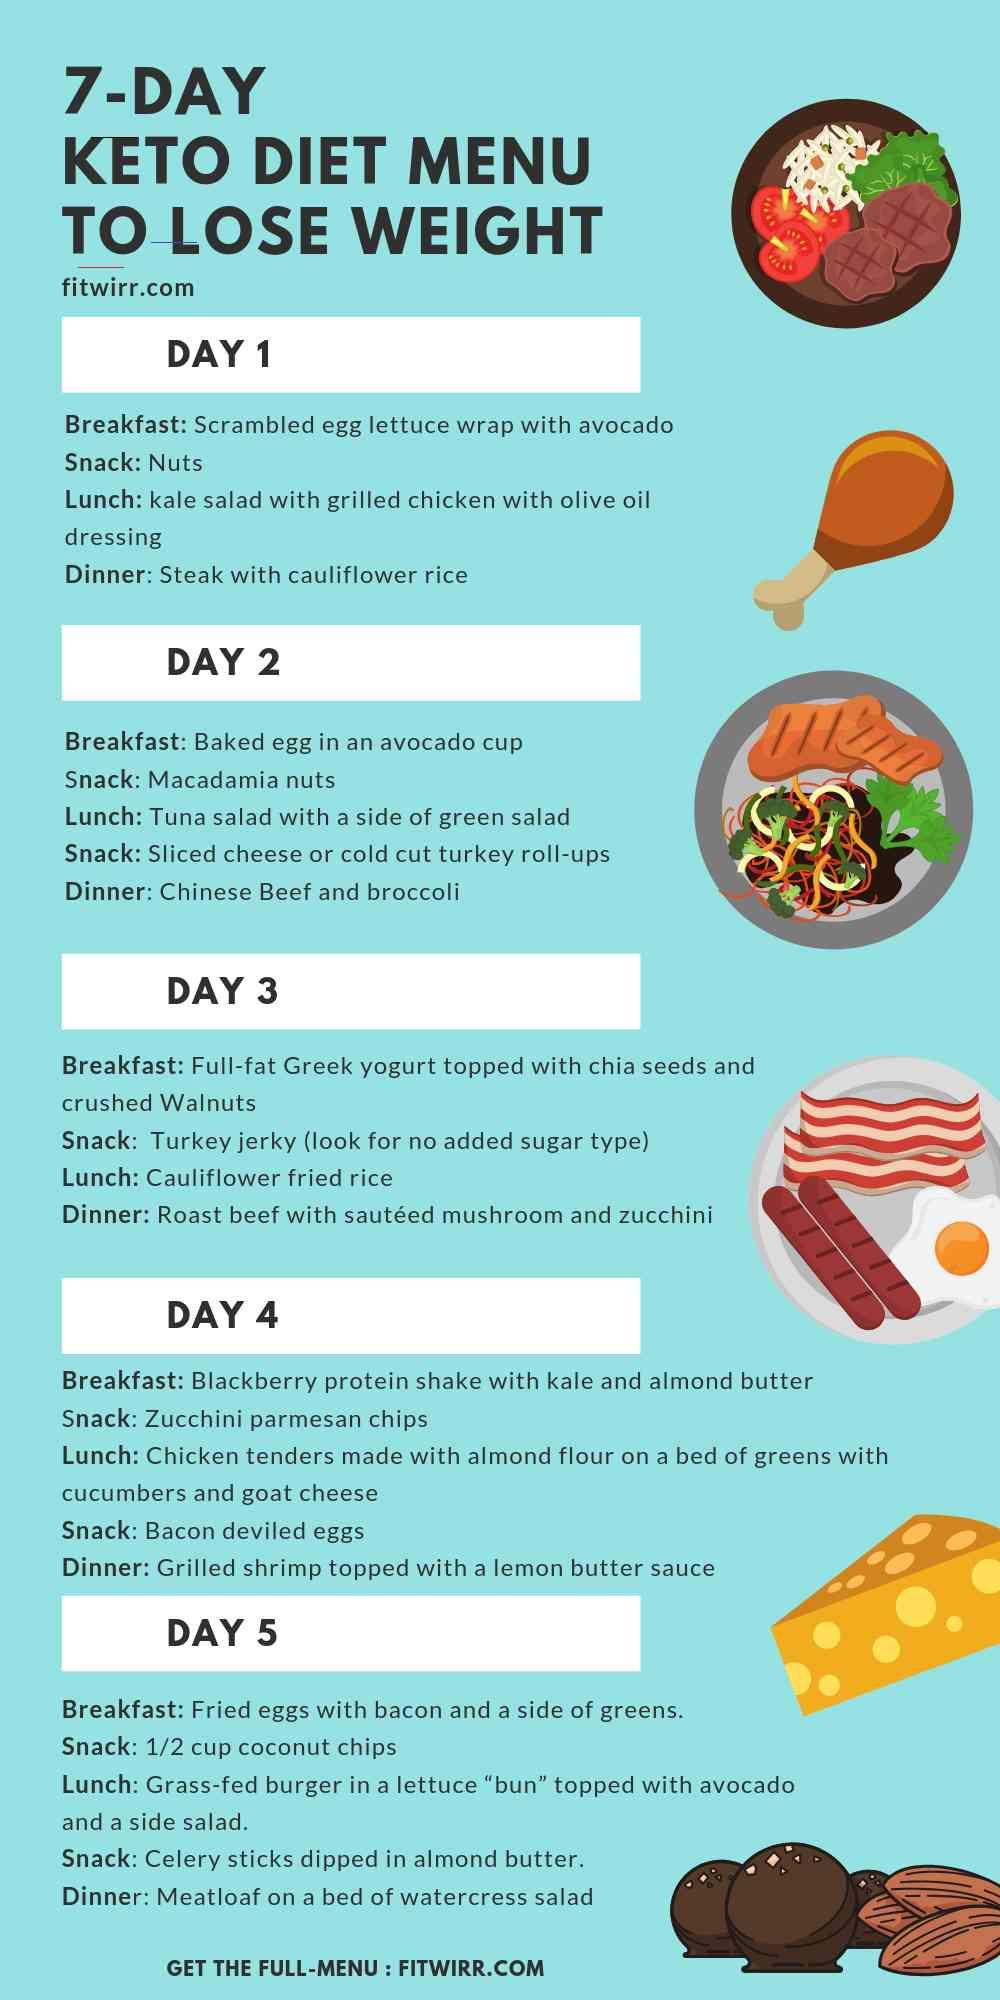 Keto Diet Menu 7 Day Meal Plan For Beginners To Lose 10 LBS Fitwirr 